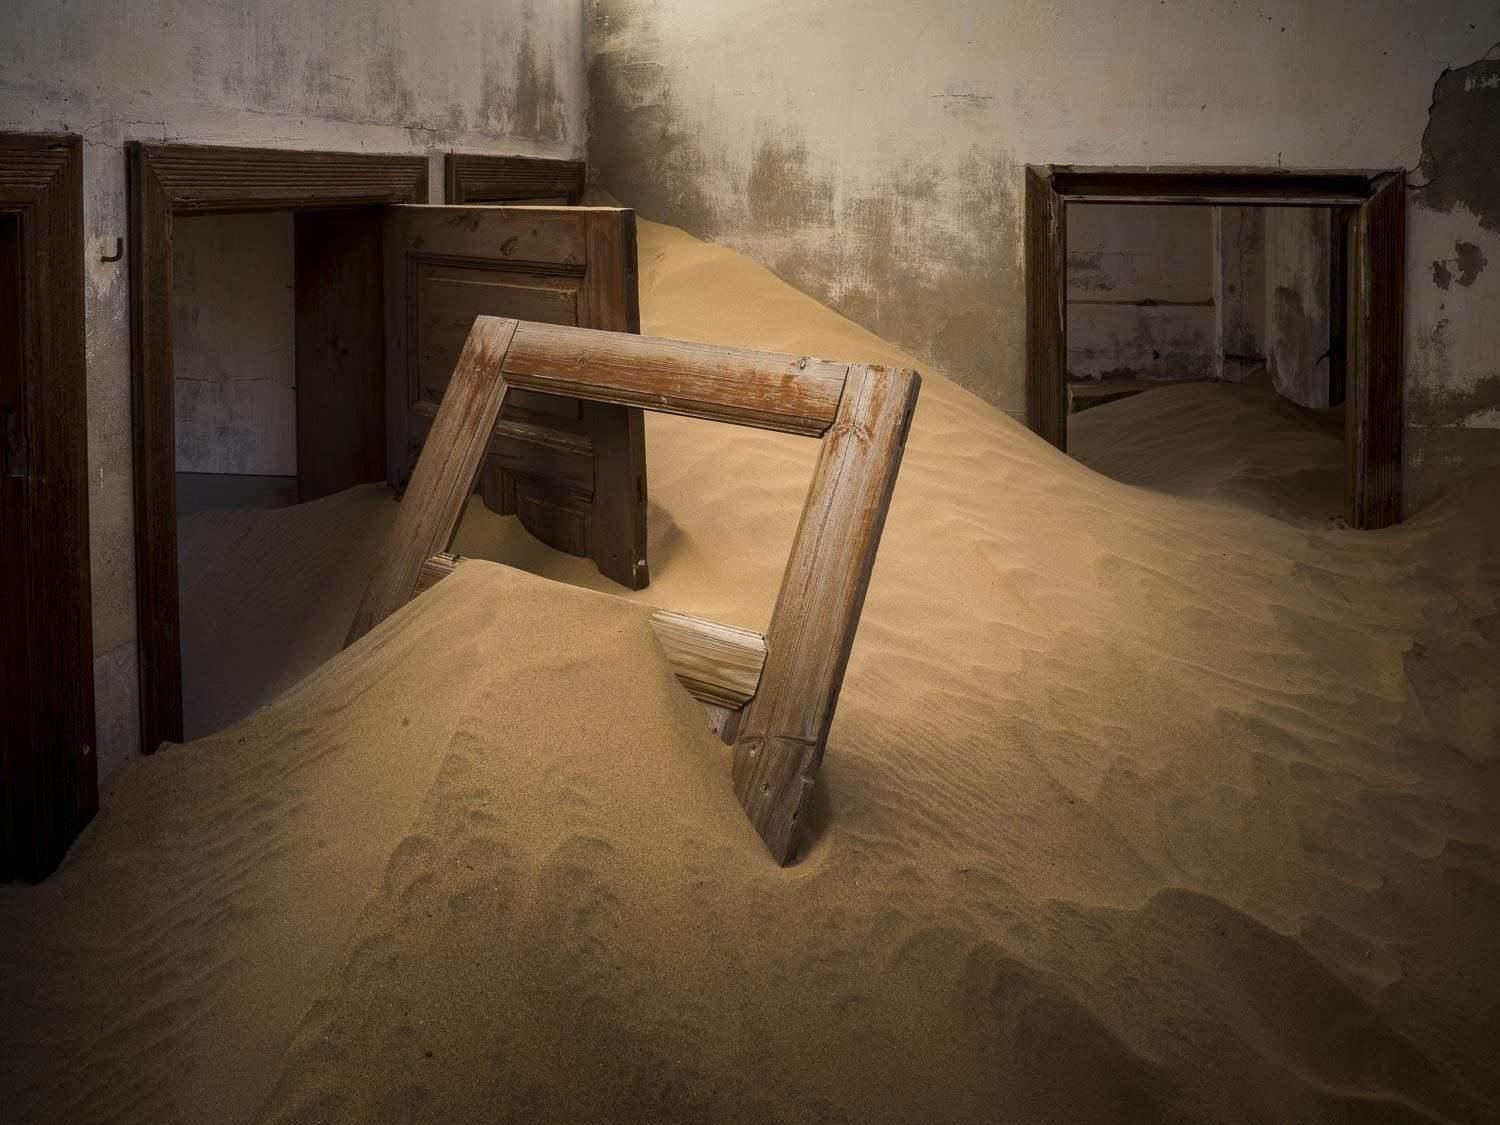 Making of a house with a lot of construction sand inside, and a broken door inside the sand, Kolmanskop #3